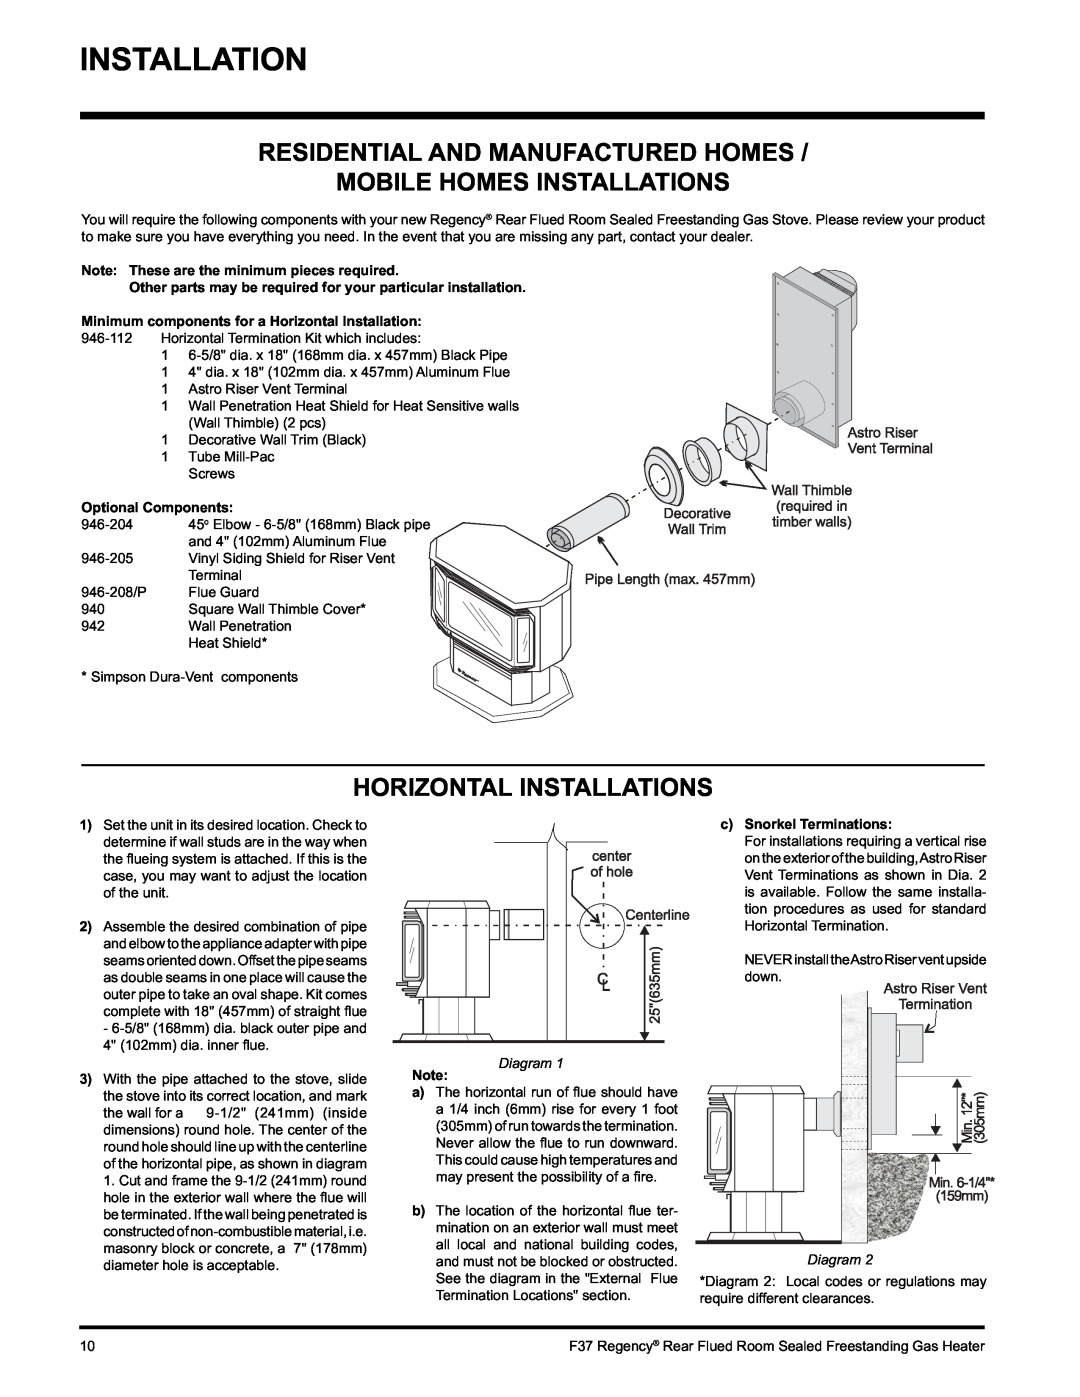 Regency F37-NG, F37-LPG Residential And Manufactured Homes, Mobile Homes Installations, Horizontal Installations, Diagram 